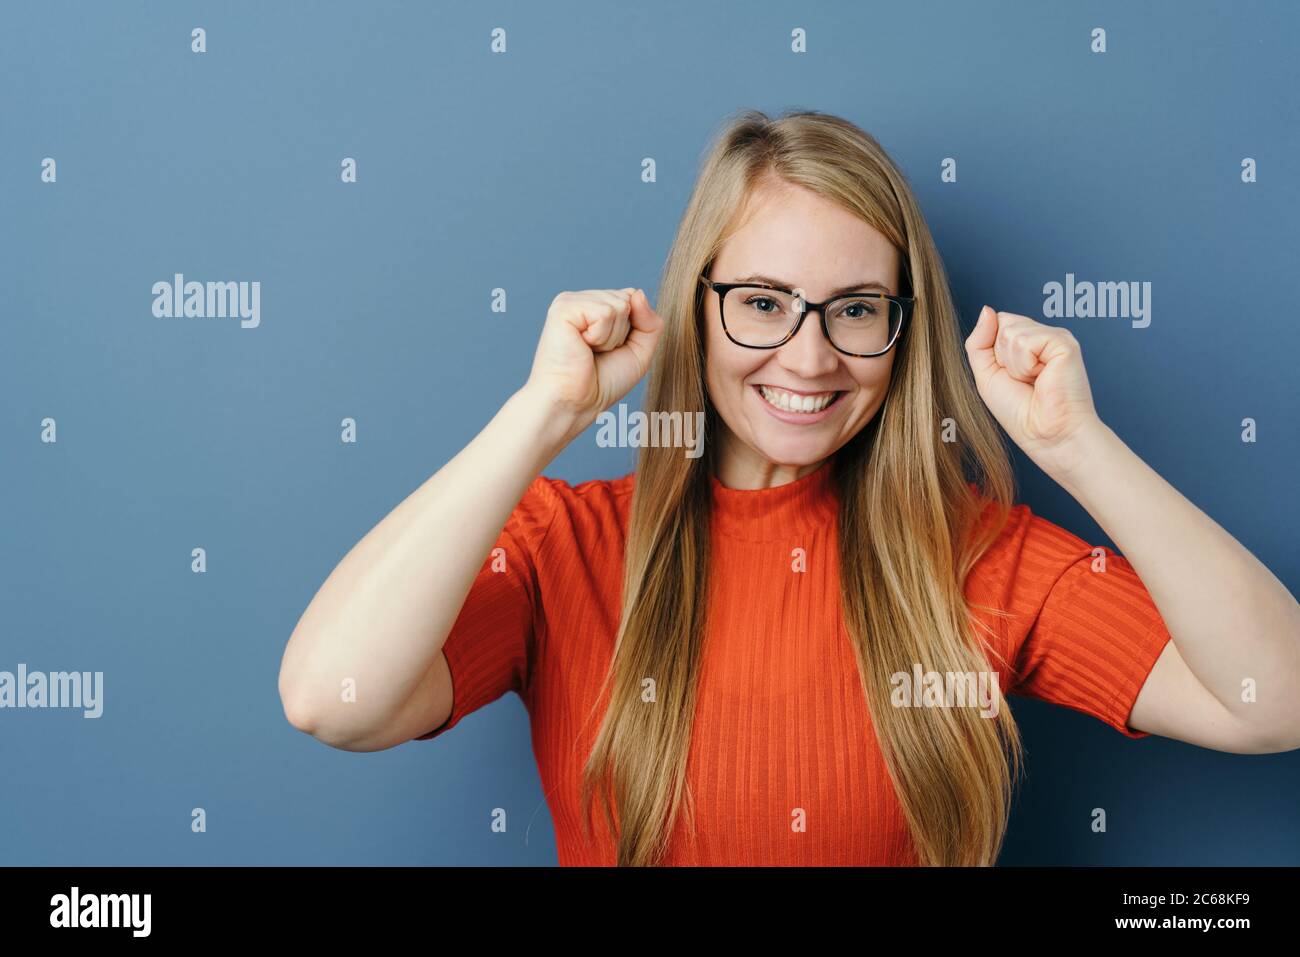 Elated young woman cheering and punching the air with her fists with a beaming smile after receiving good news of a personal success over a blue studi Stock Photo